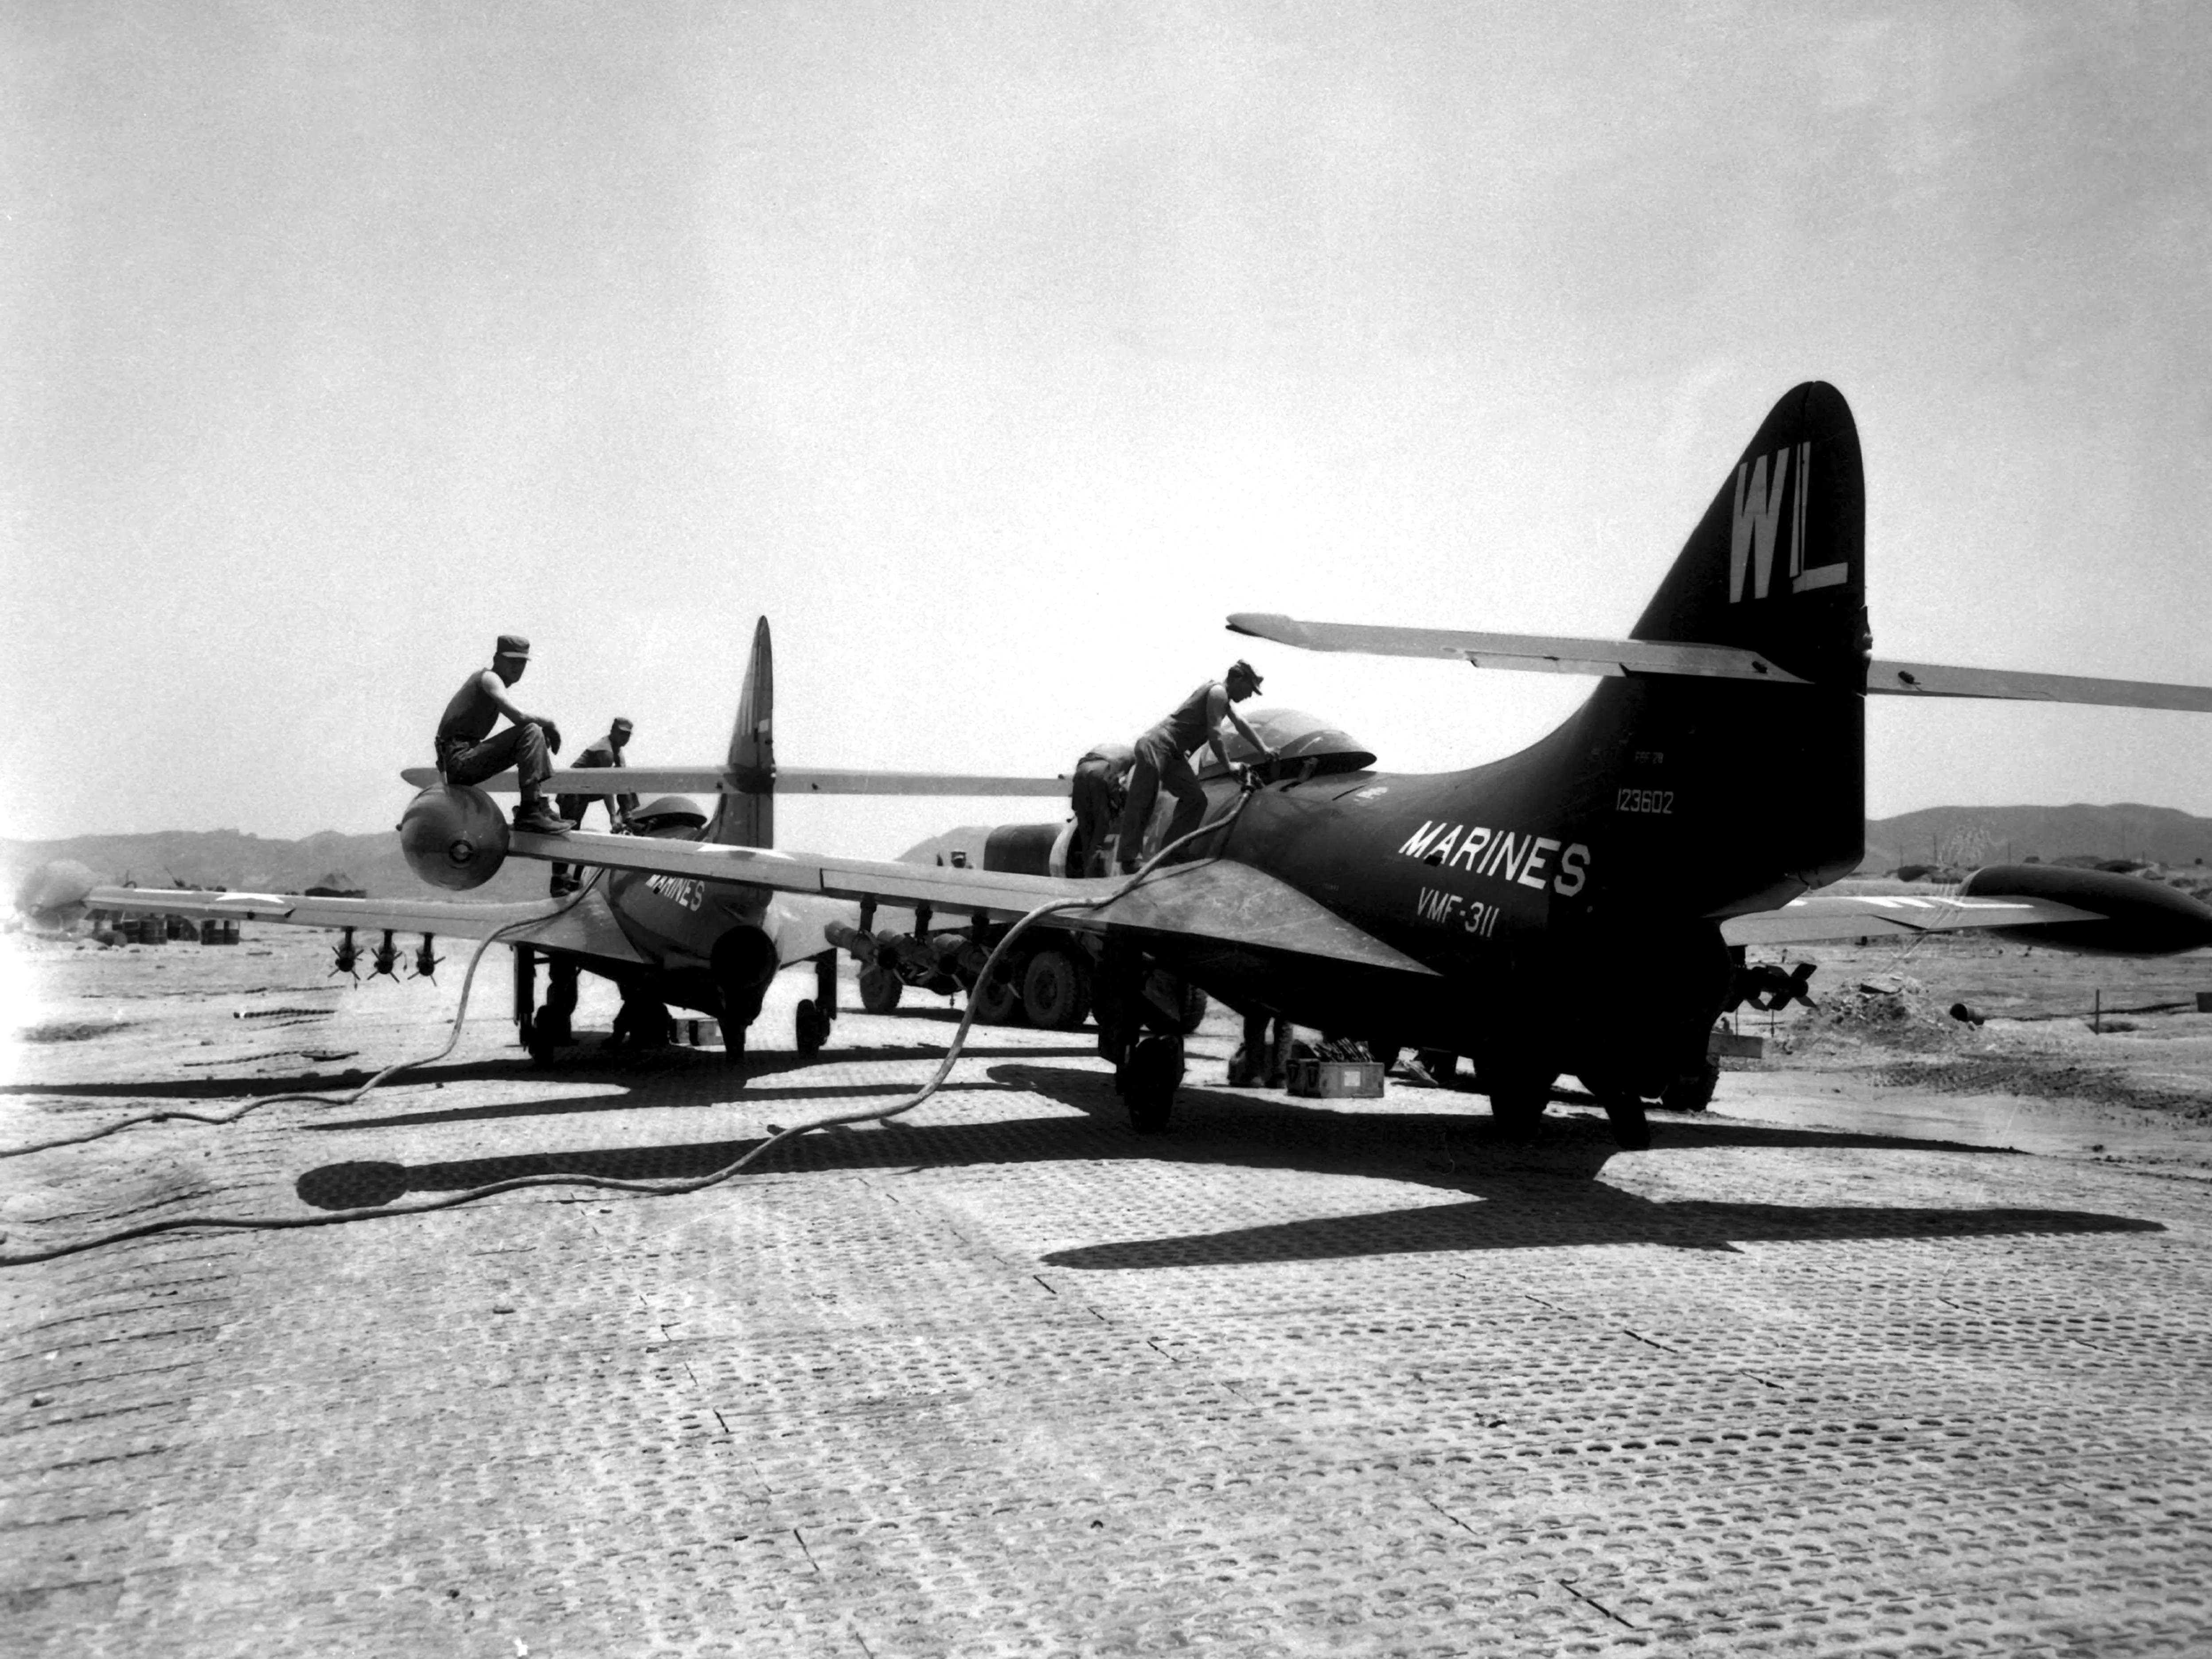 During the Korean War, two United States Grumman F9F Panther jet fighters are refueling after having been armed with rockets under their wings in 1951.